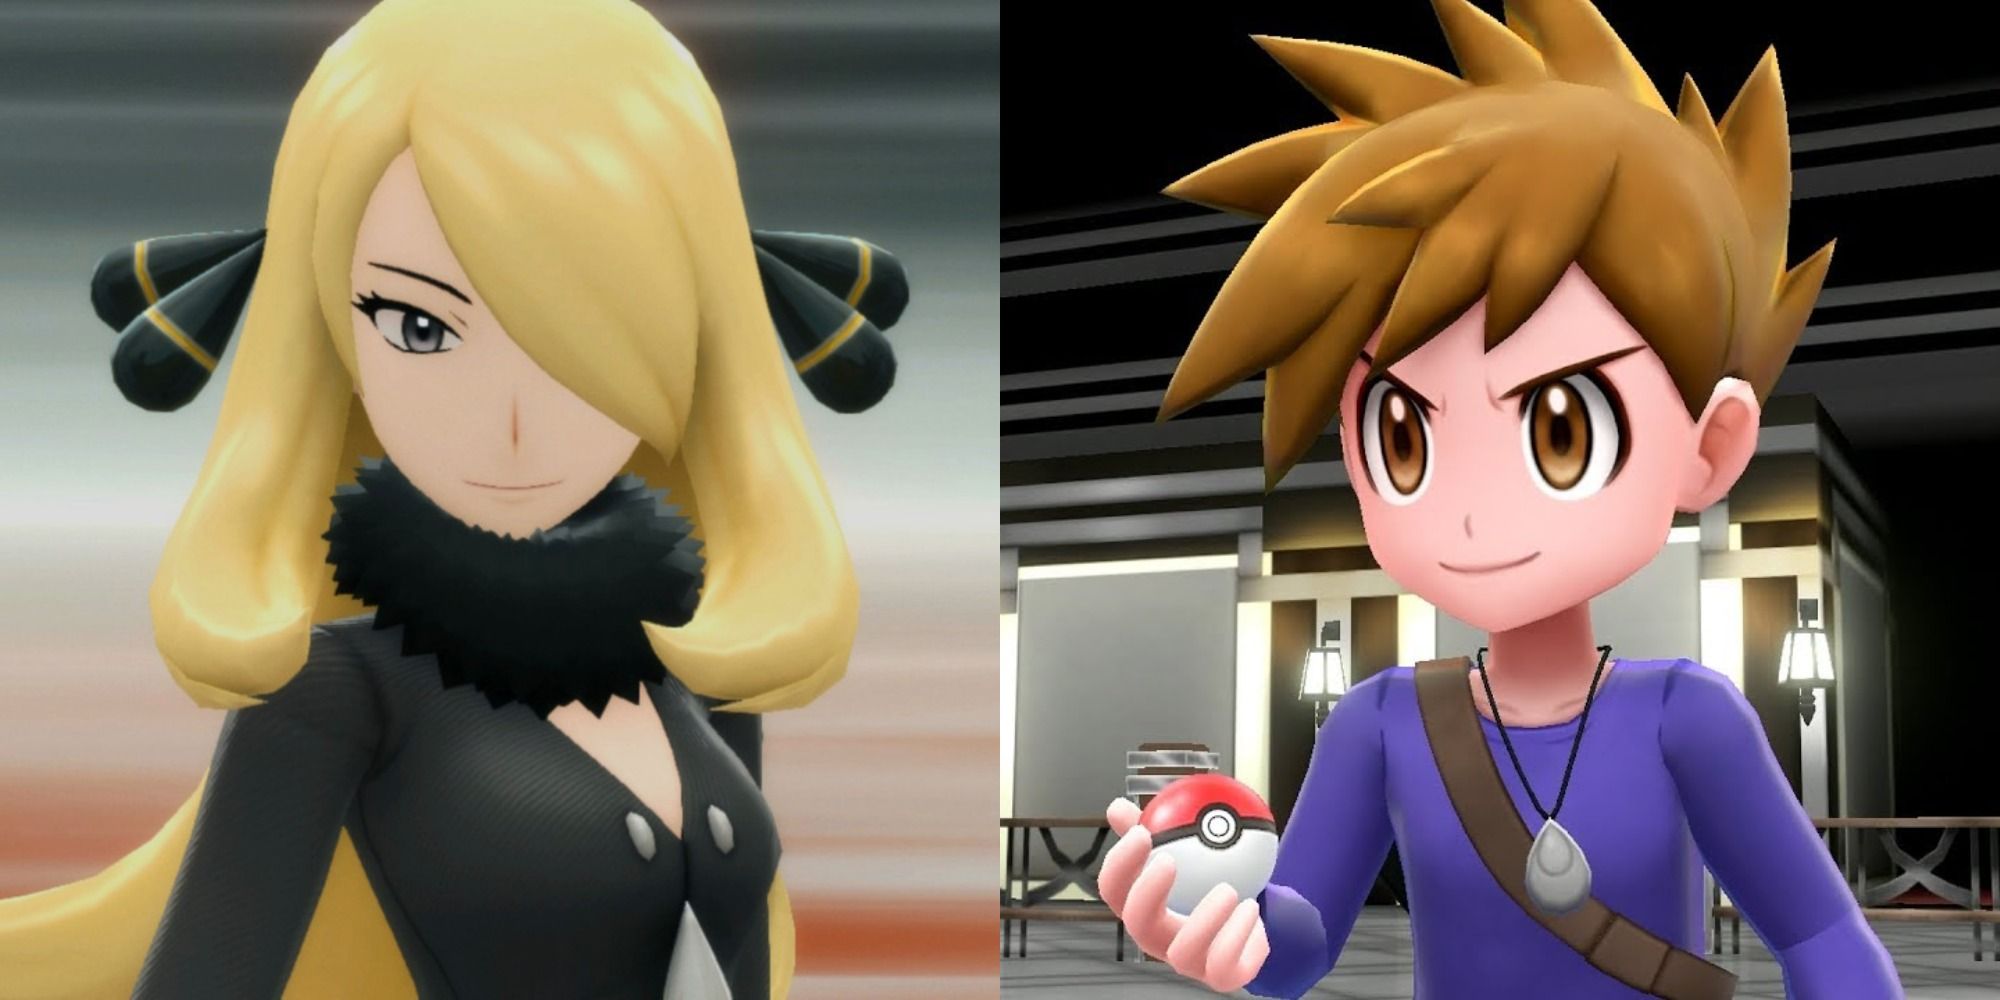 Split image showing Cynthia in BDSP and Blue in Let's Go